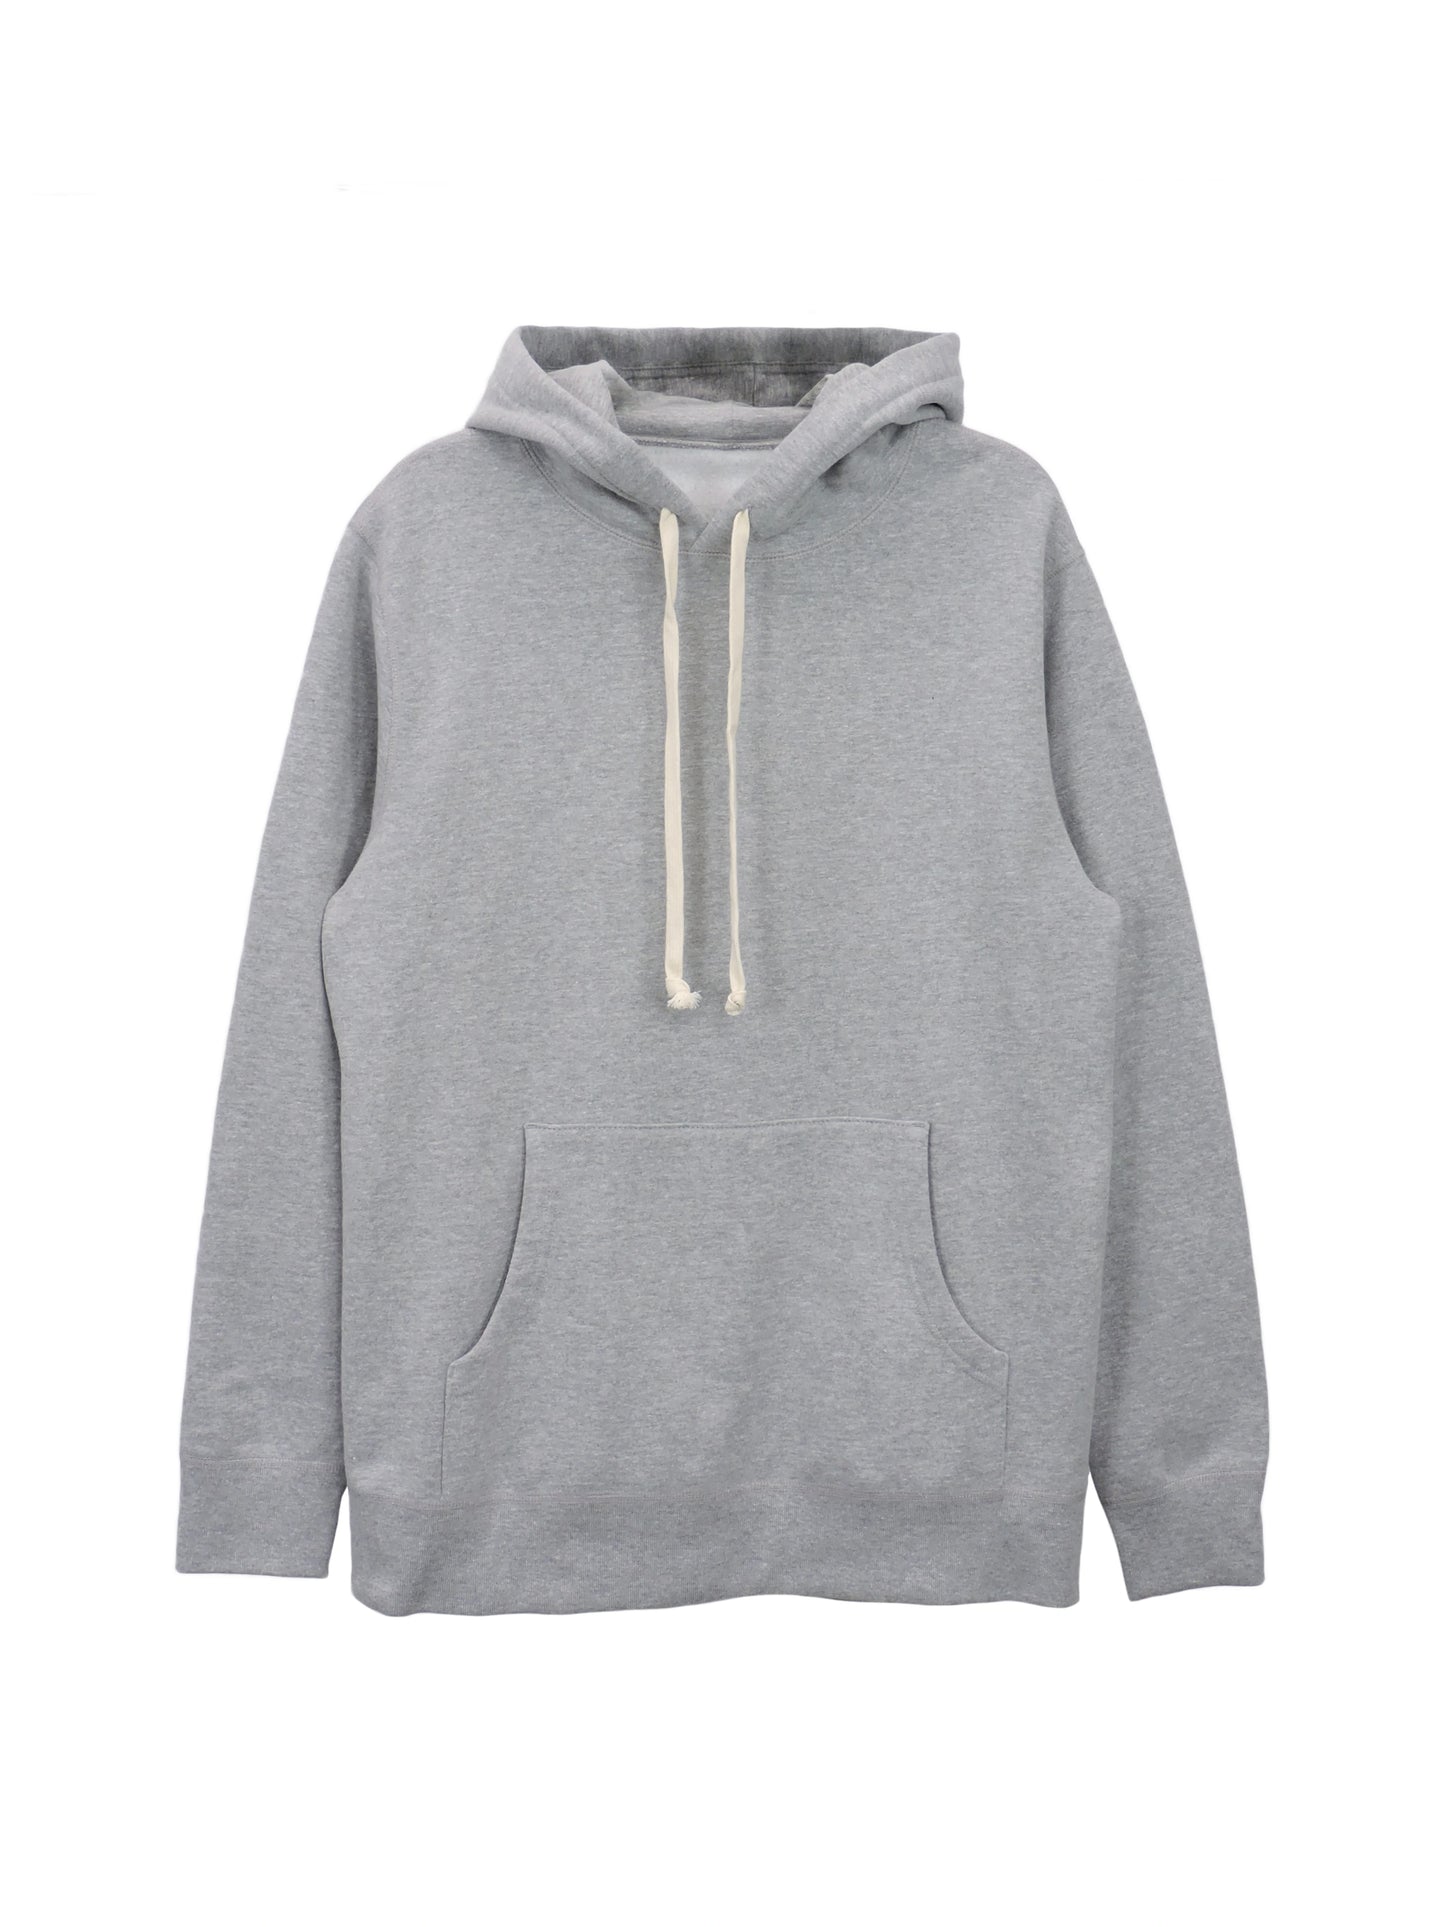 Heather Grey Heavy Fleece Hoodie with White Drrawstrings and Kangeroo Pouch